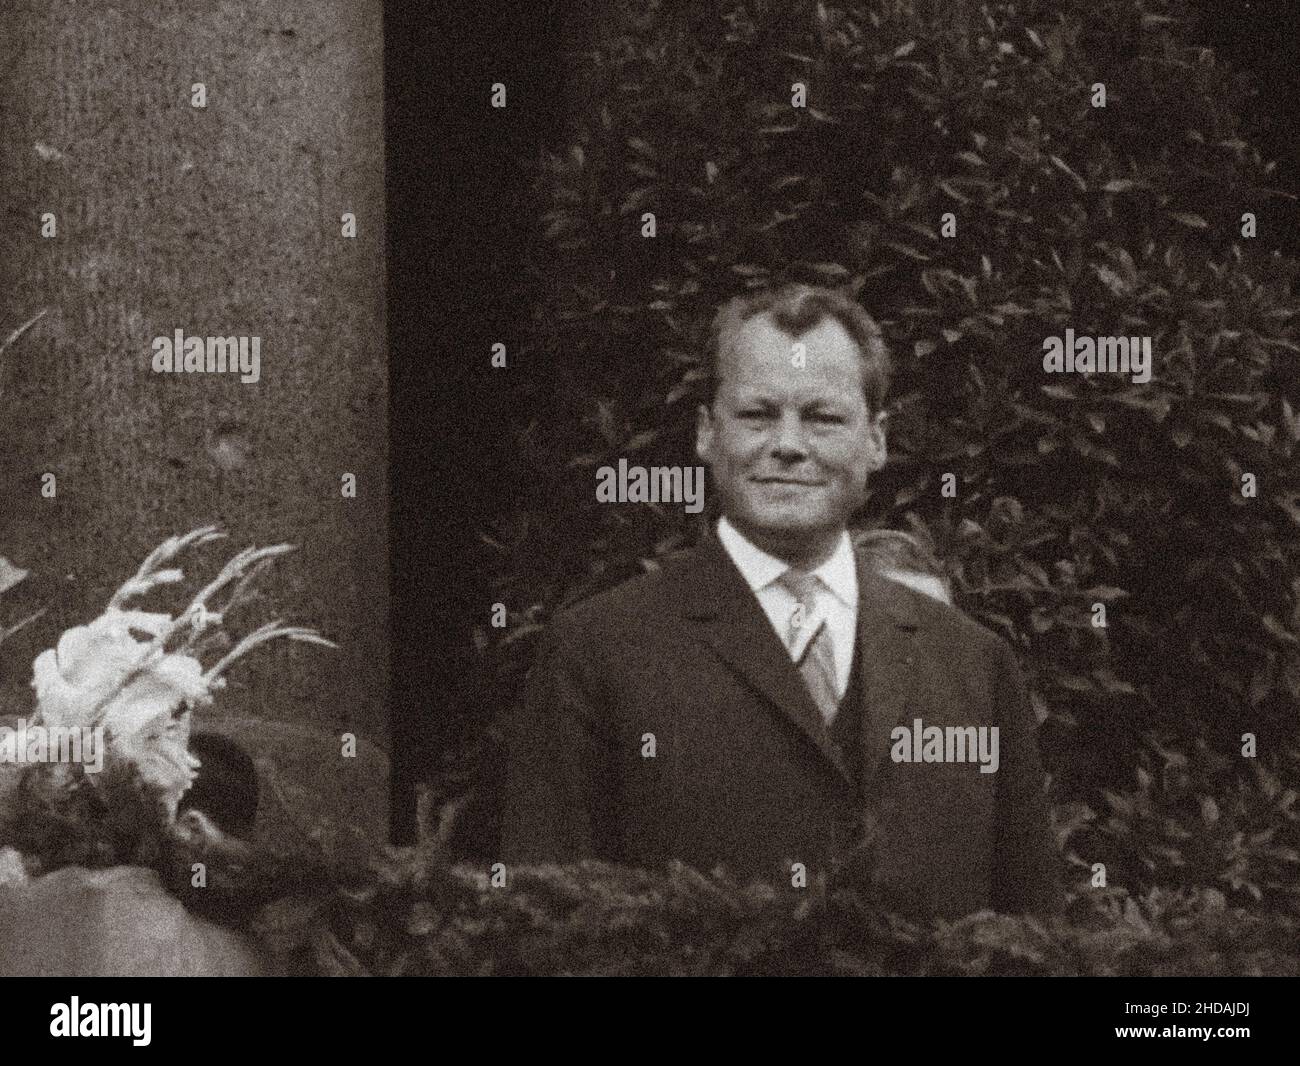 Berlin Crisis of 1961. Willy Brandt Governing Mayor of West Berlin. Serie of archivel photos depicts the August 1961 travel ban between East and West Stock Photo